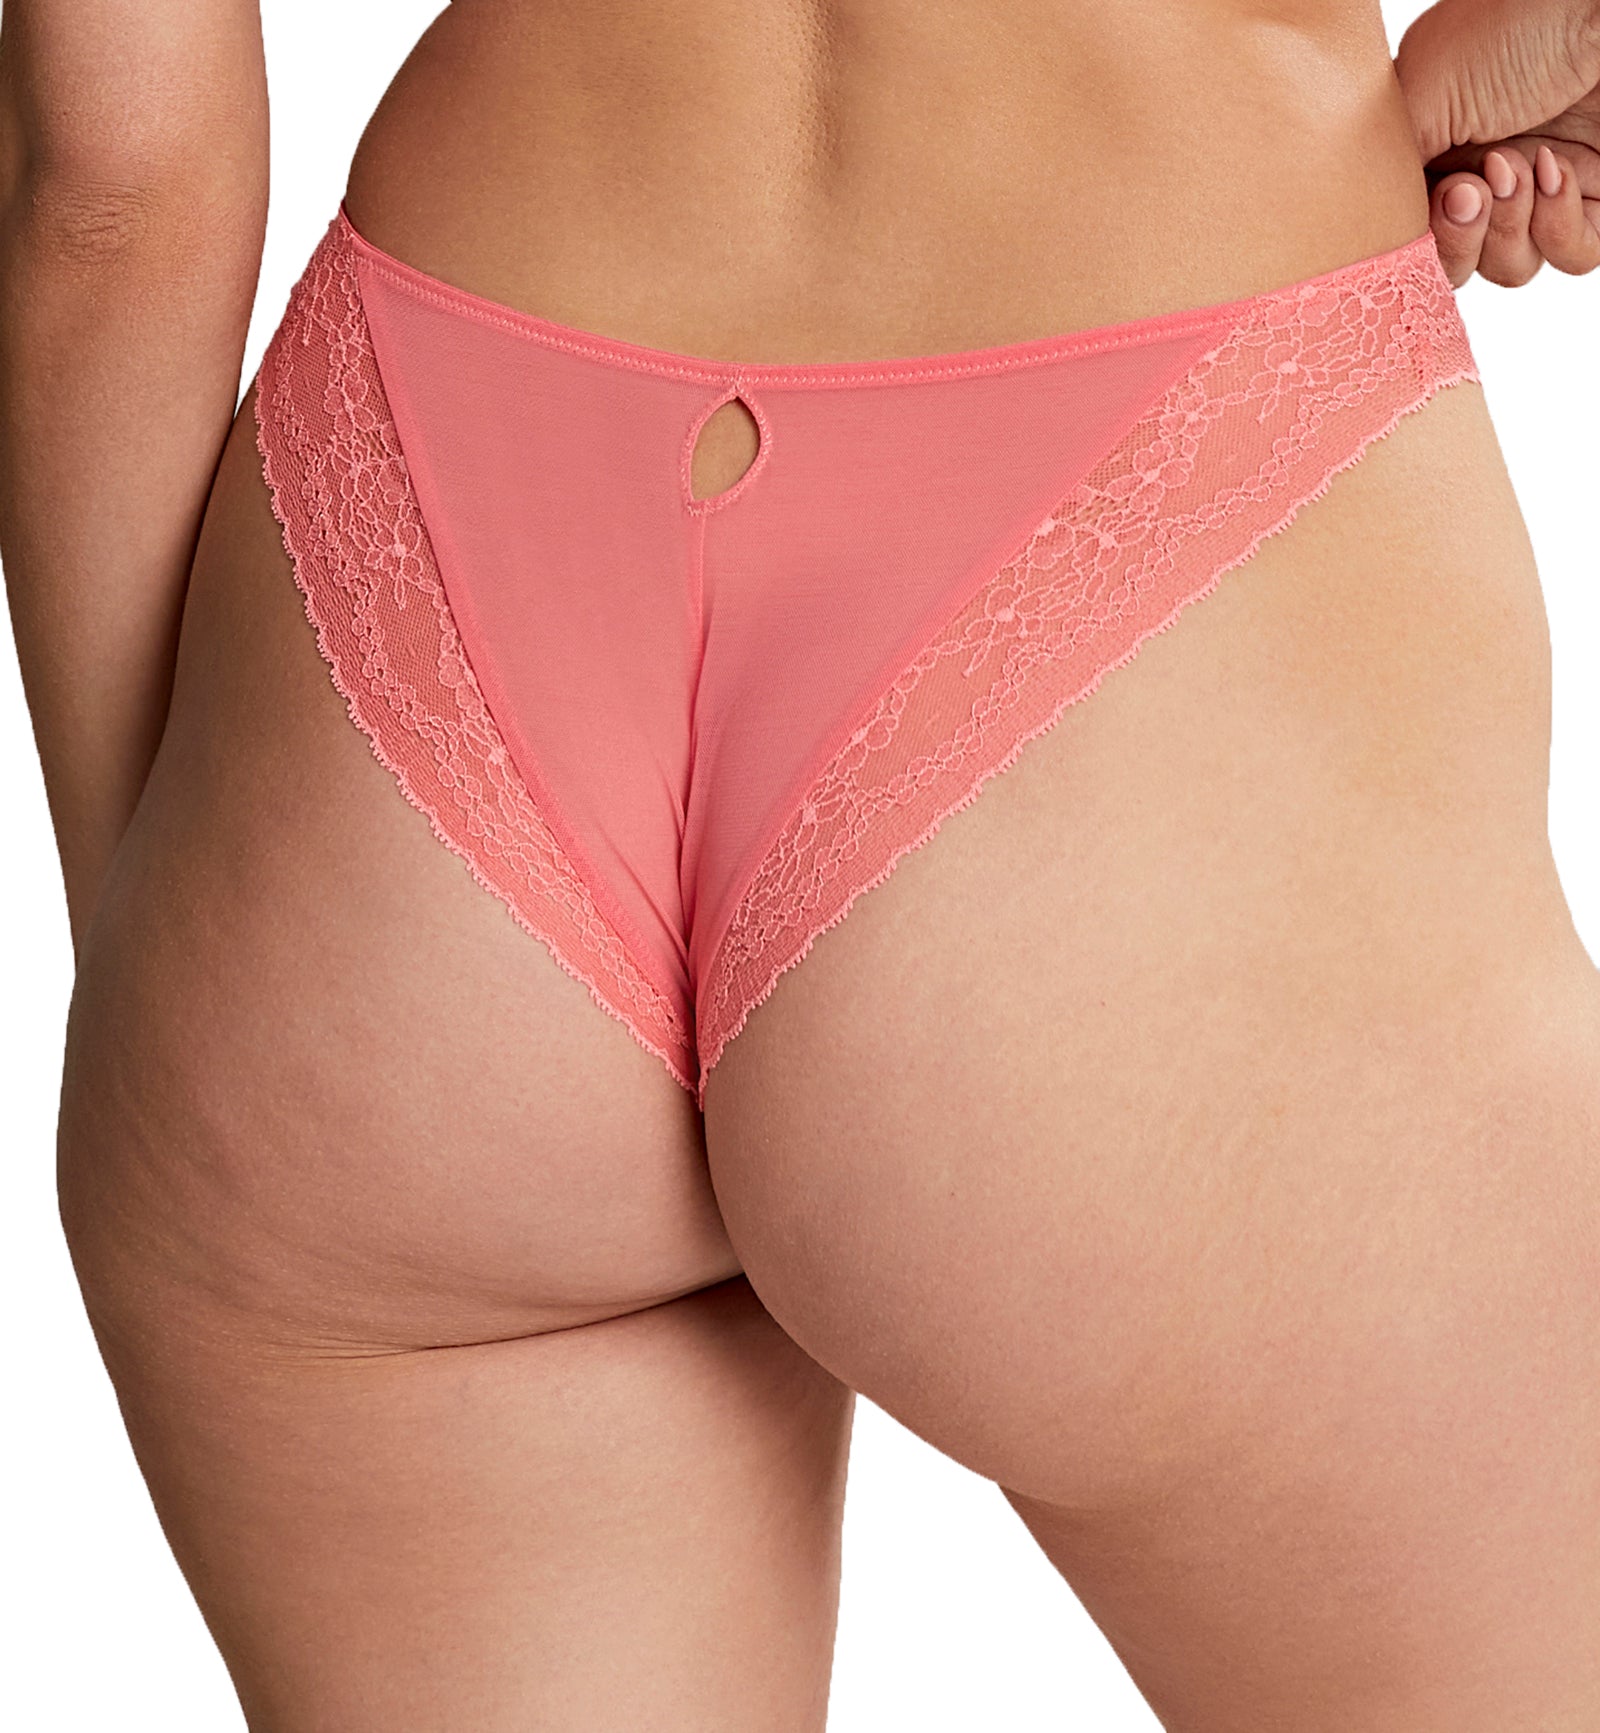 Cleo by Panache Alexis Brazilian Brief (10472),XS,Sunkiss Coral - Sunkiss Coral,XS